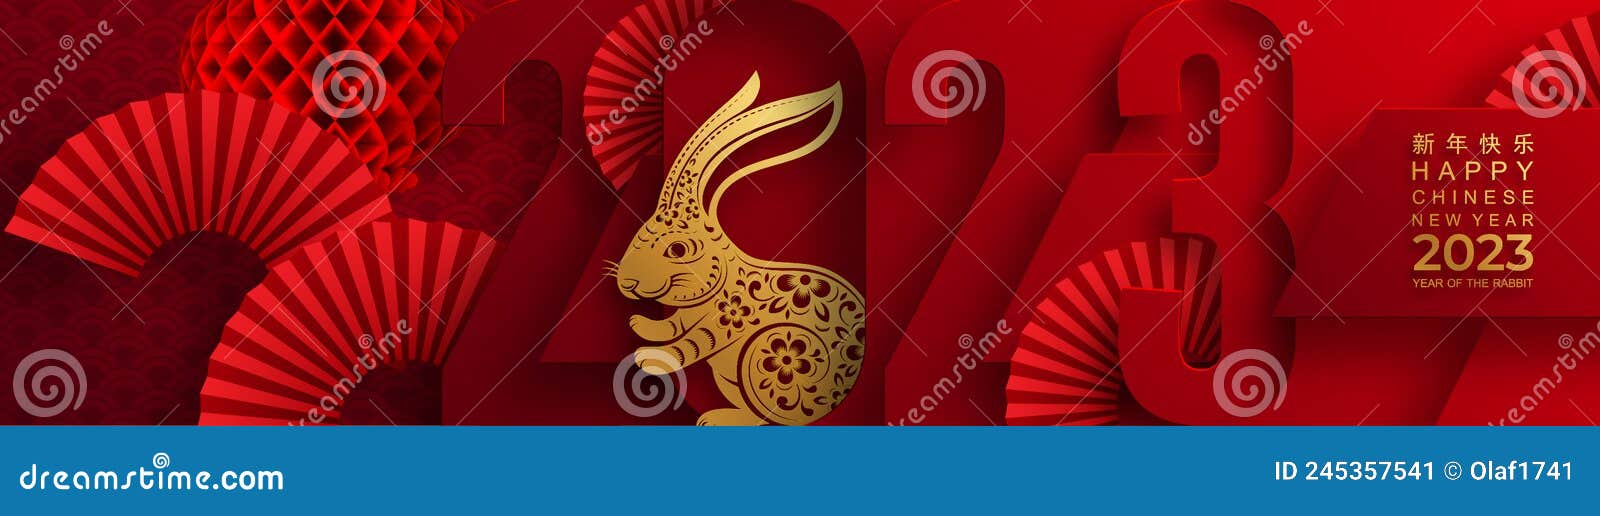 Chinese new year 2023 year of the rabbit banner in paper cut style